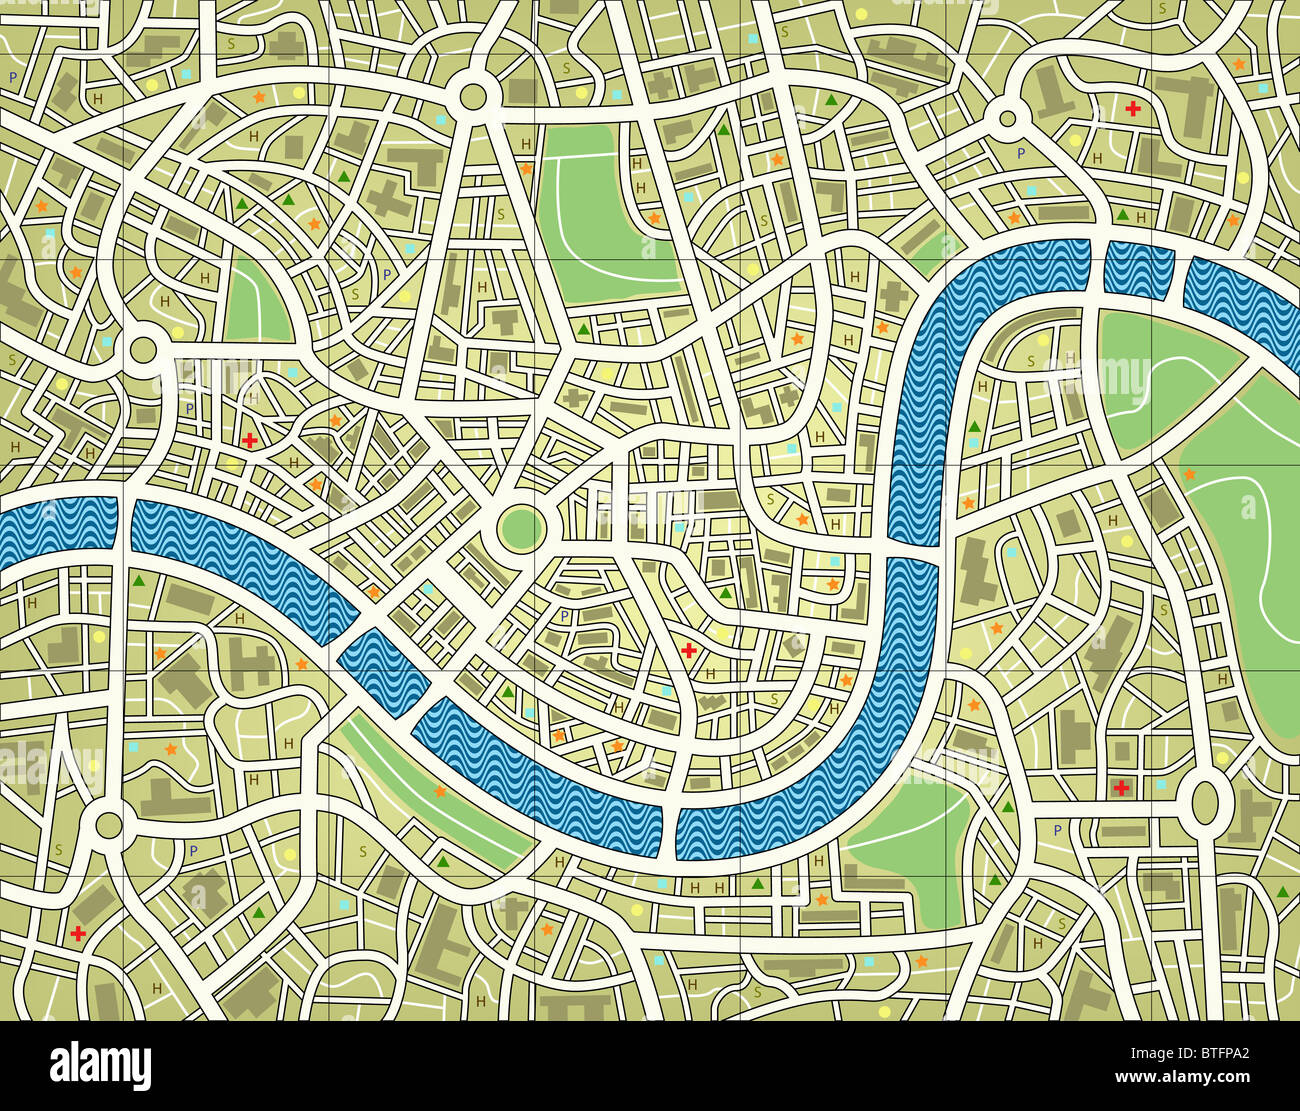 Illustration of a street map without names Stock Photo